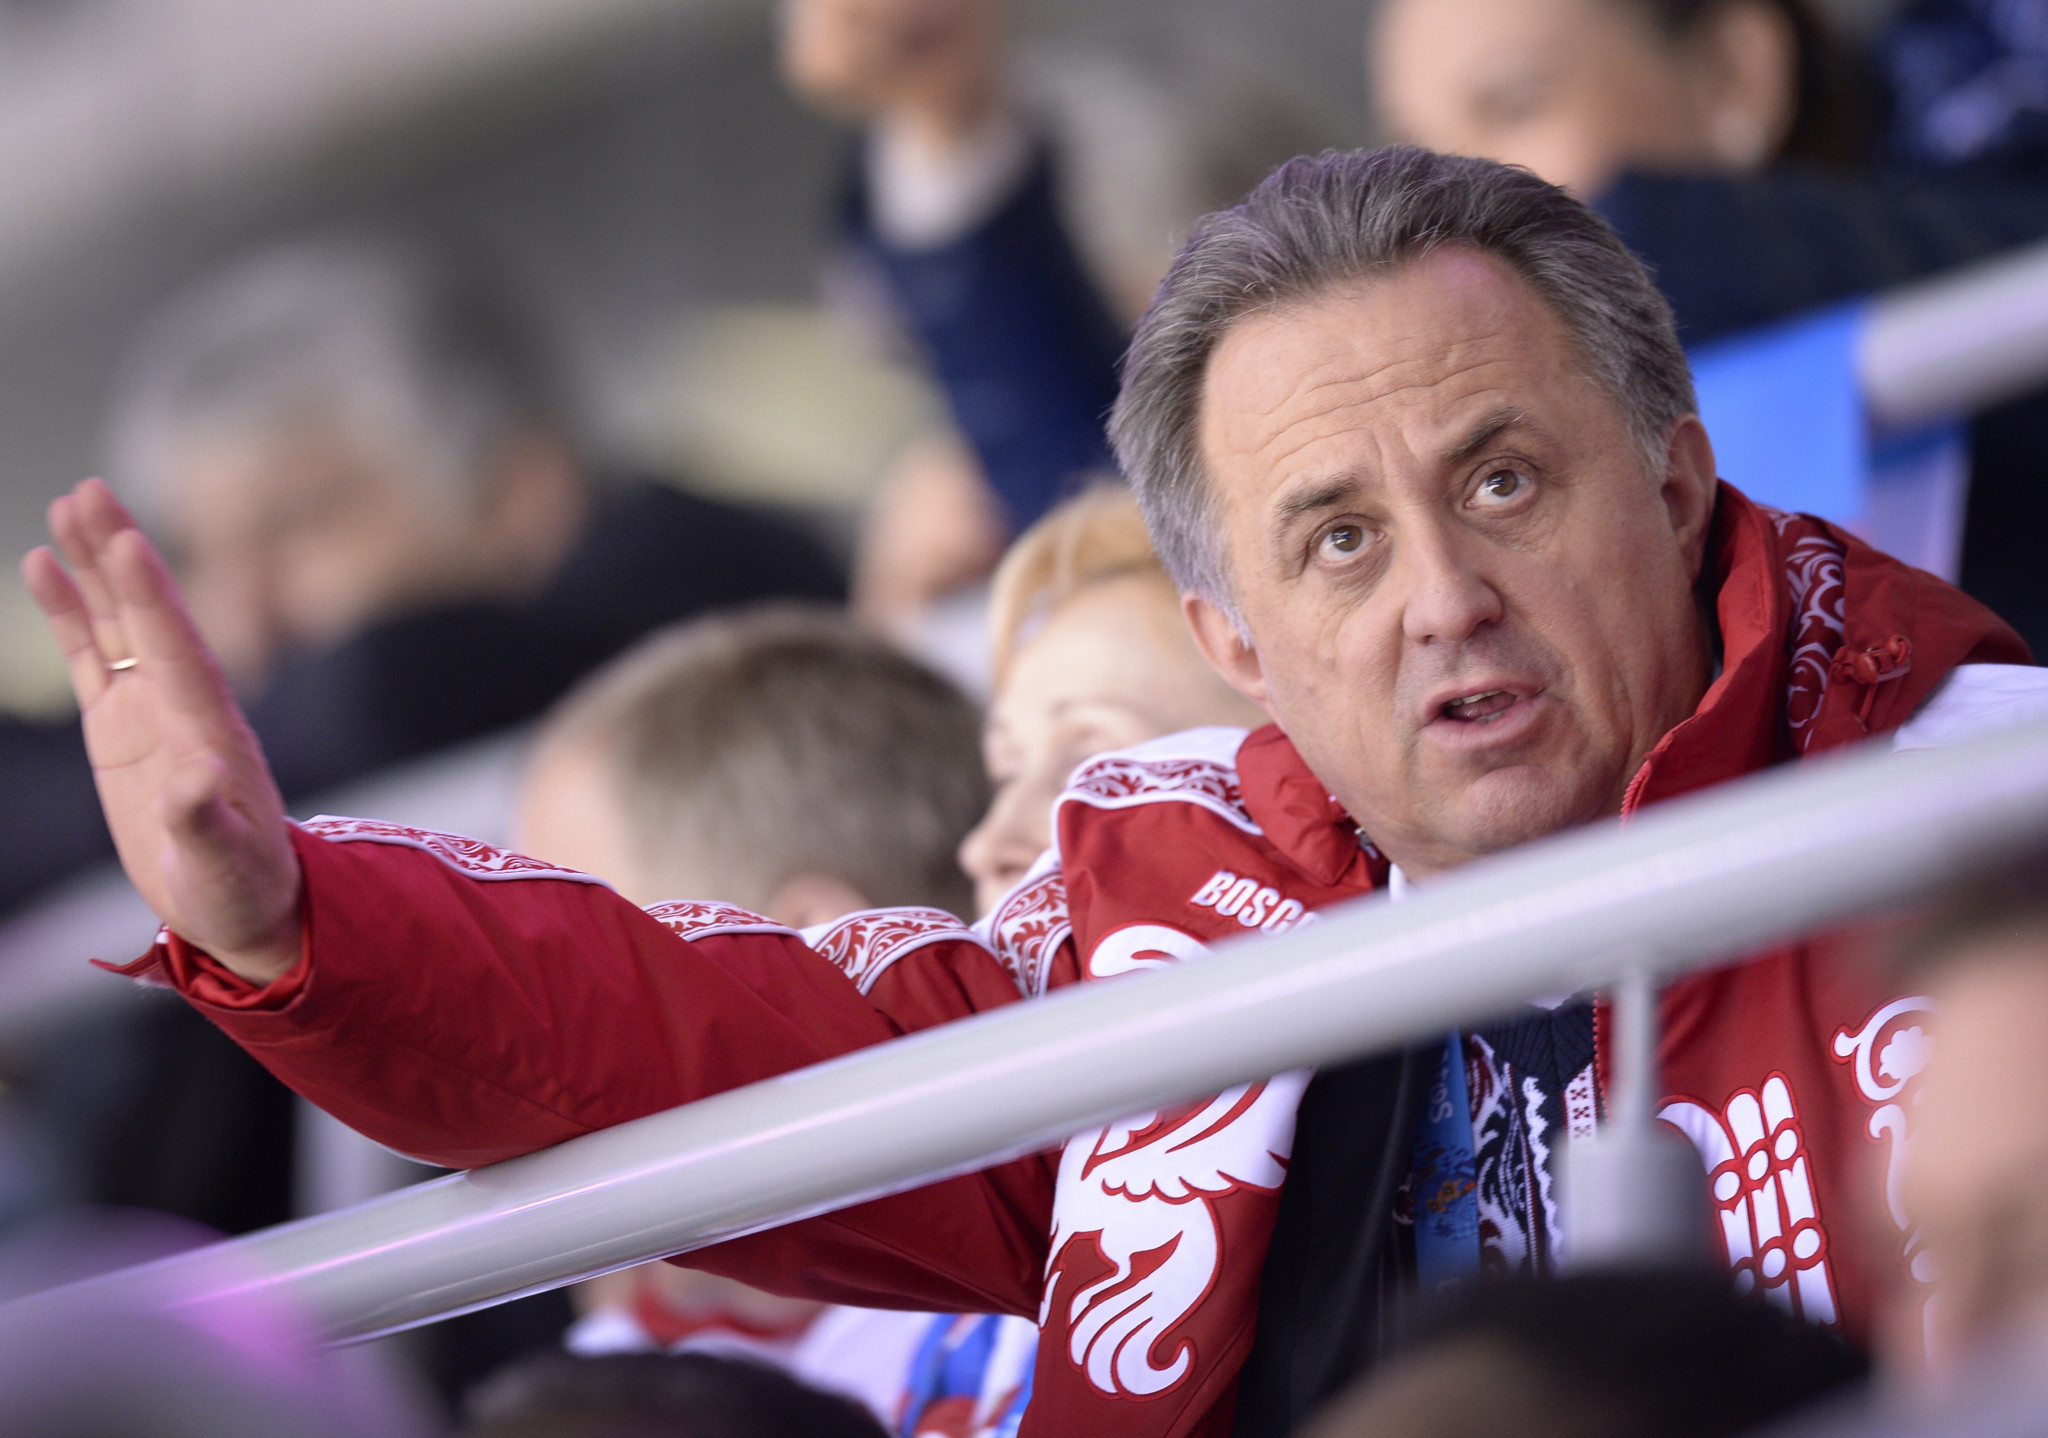 The Vitaly Mutko-headed Sports Ministry is described as the ultimate responsibility ©Getty Images